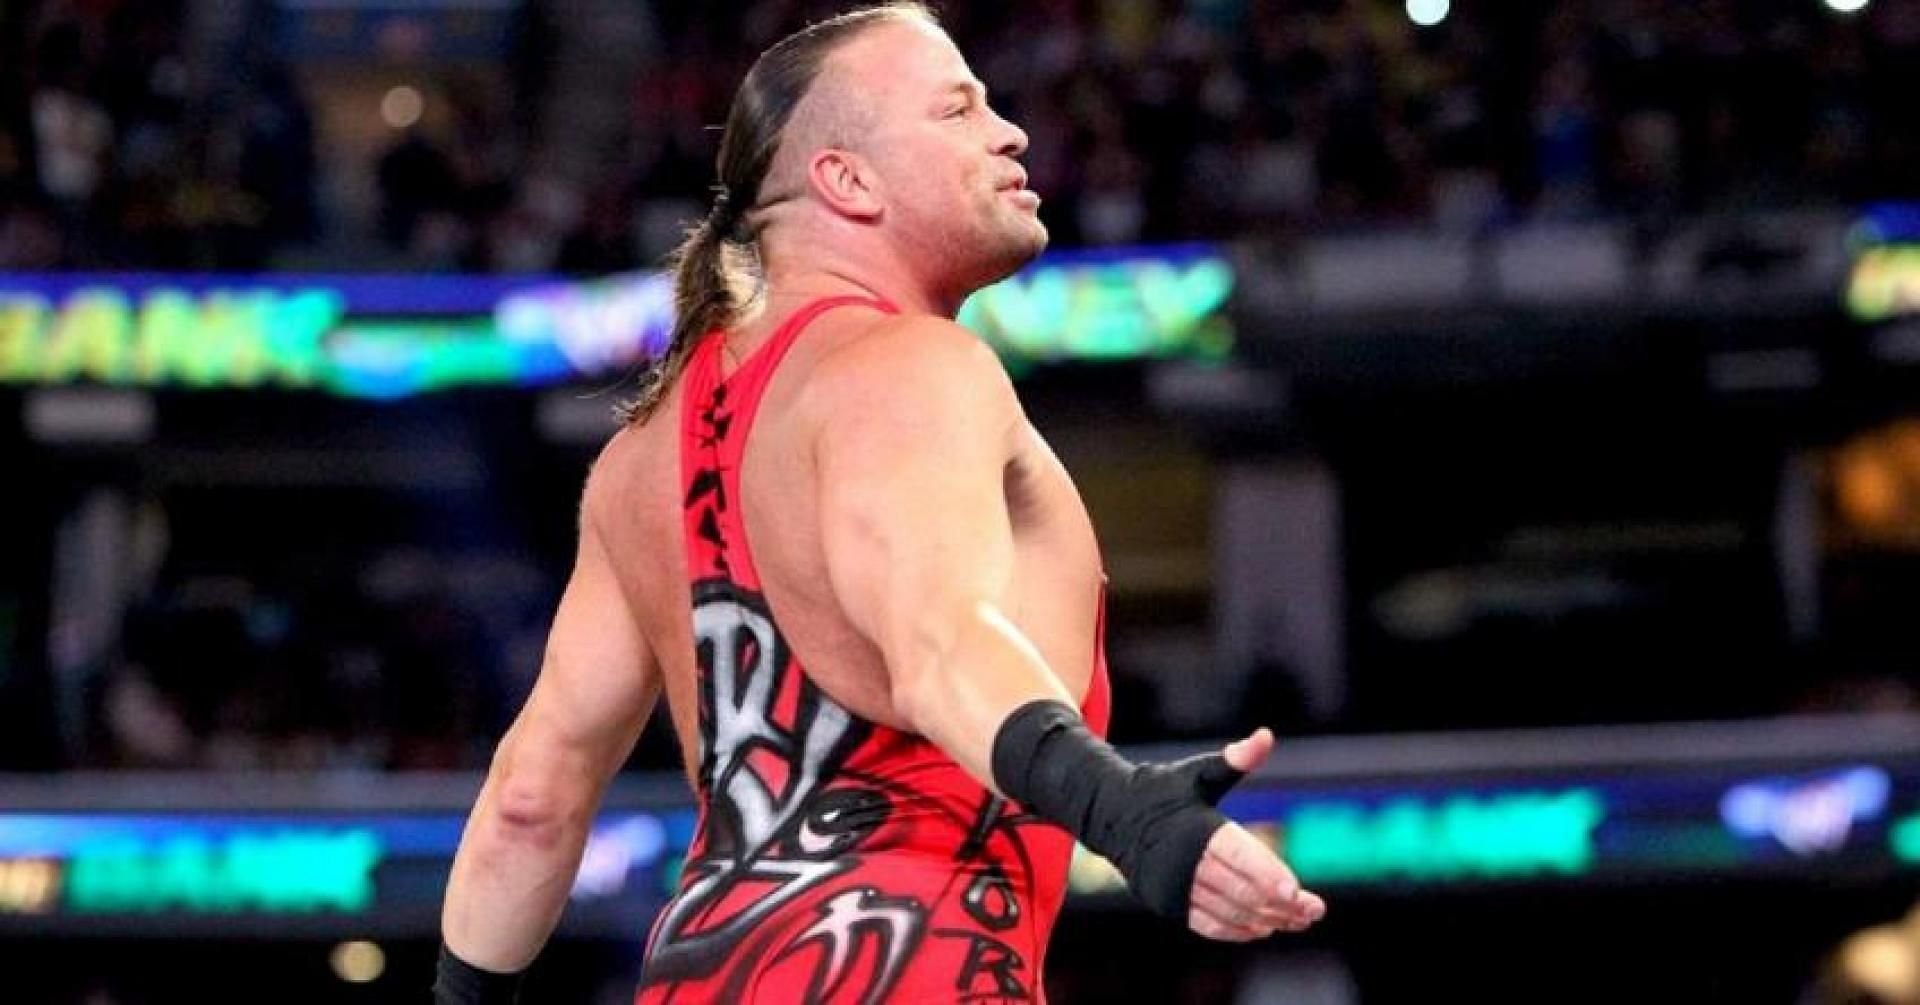 Rob Van Dam is one of the greatest competitors of all time